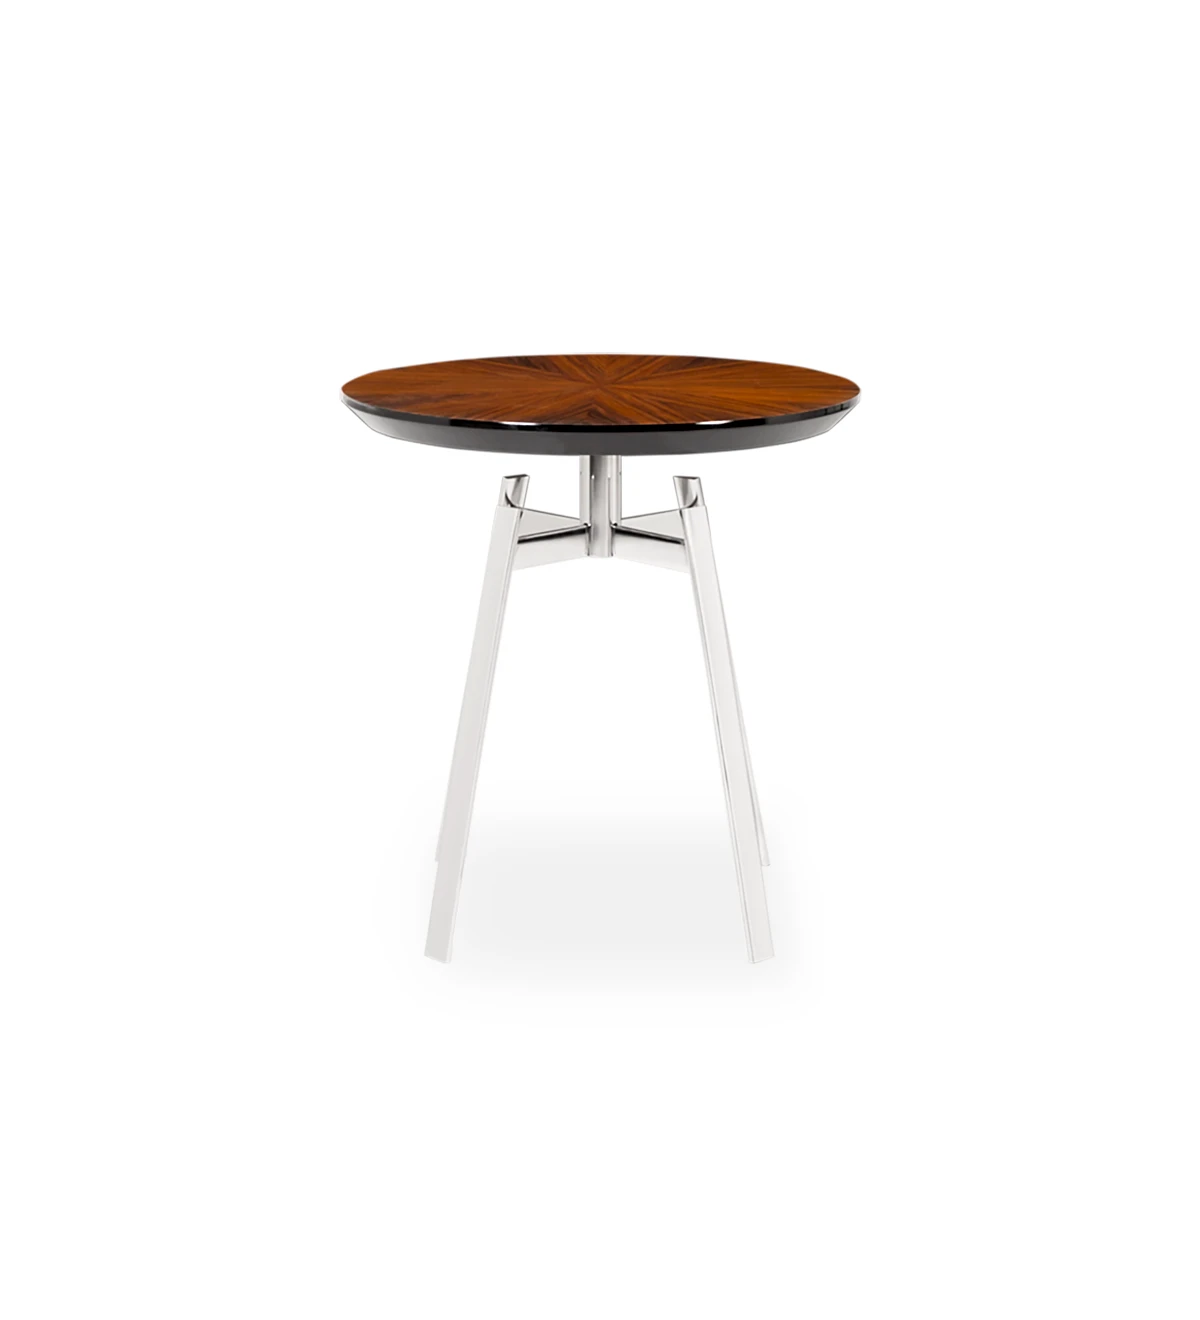 Tokyo round side table, high gloss palissander top, stainless steel foot, Ø 48,5 cm.